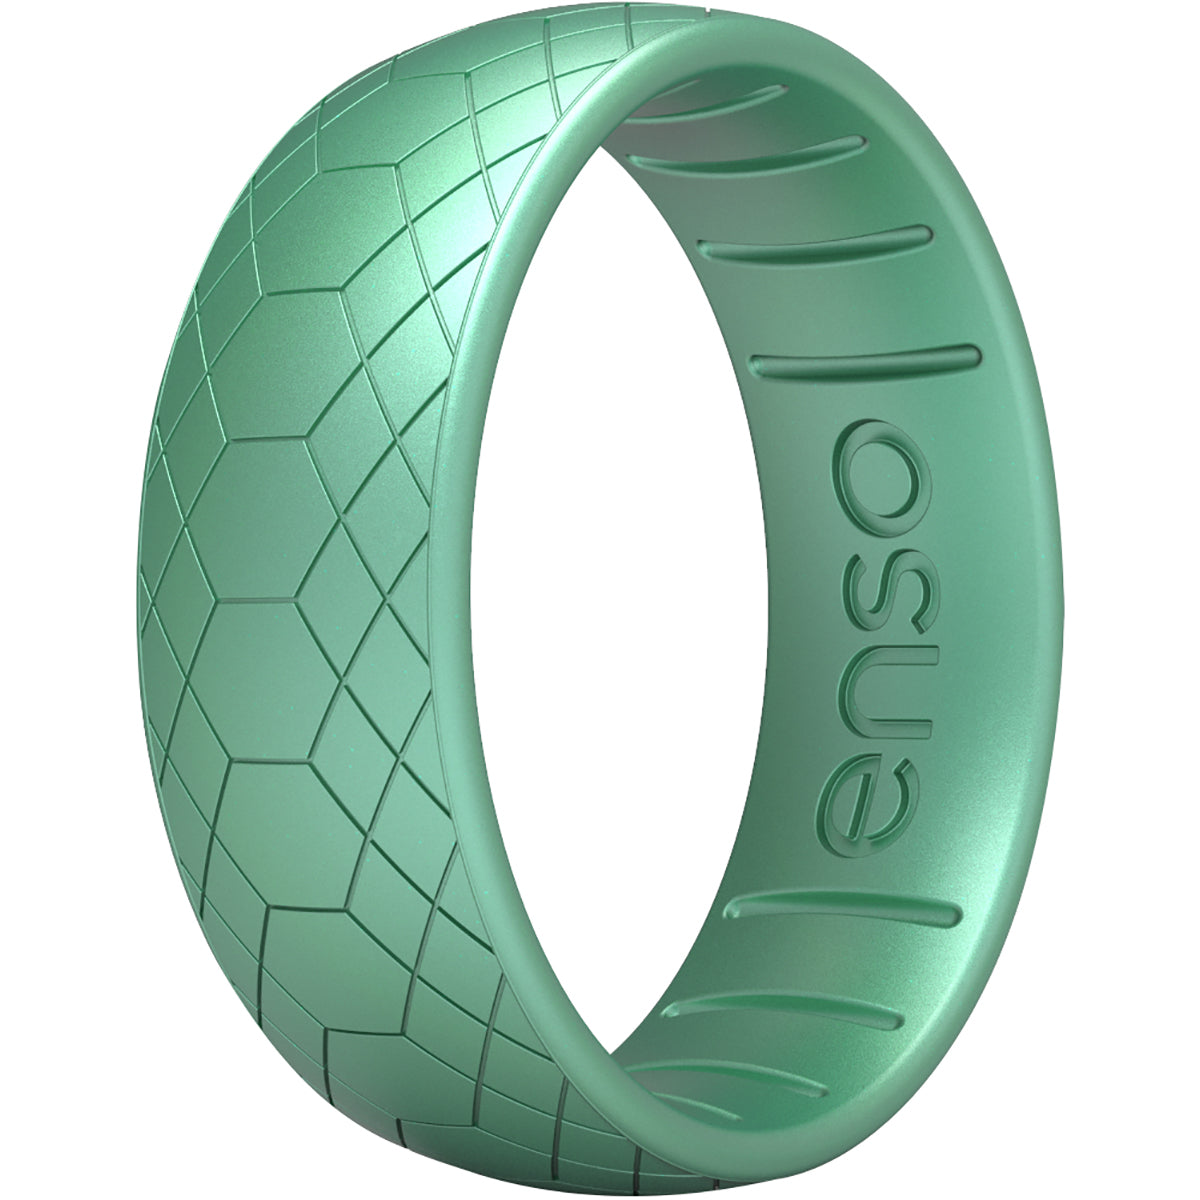 Enso Rings Classic Etched Legends Series Silicone Ring - 8 - Medusa Snake Enso Rings